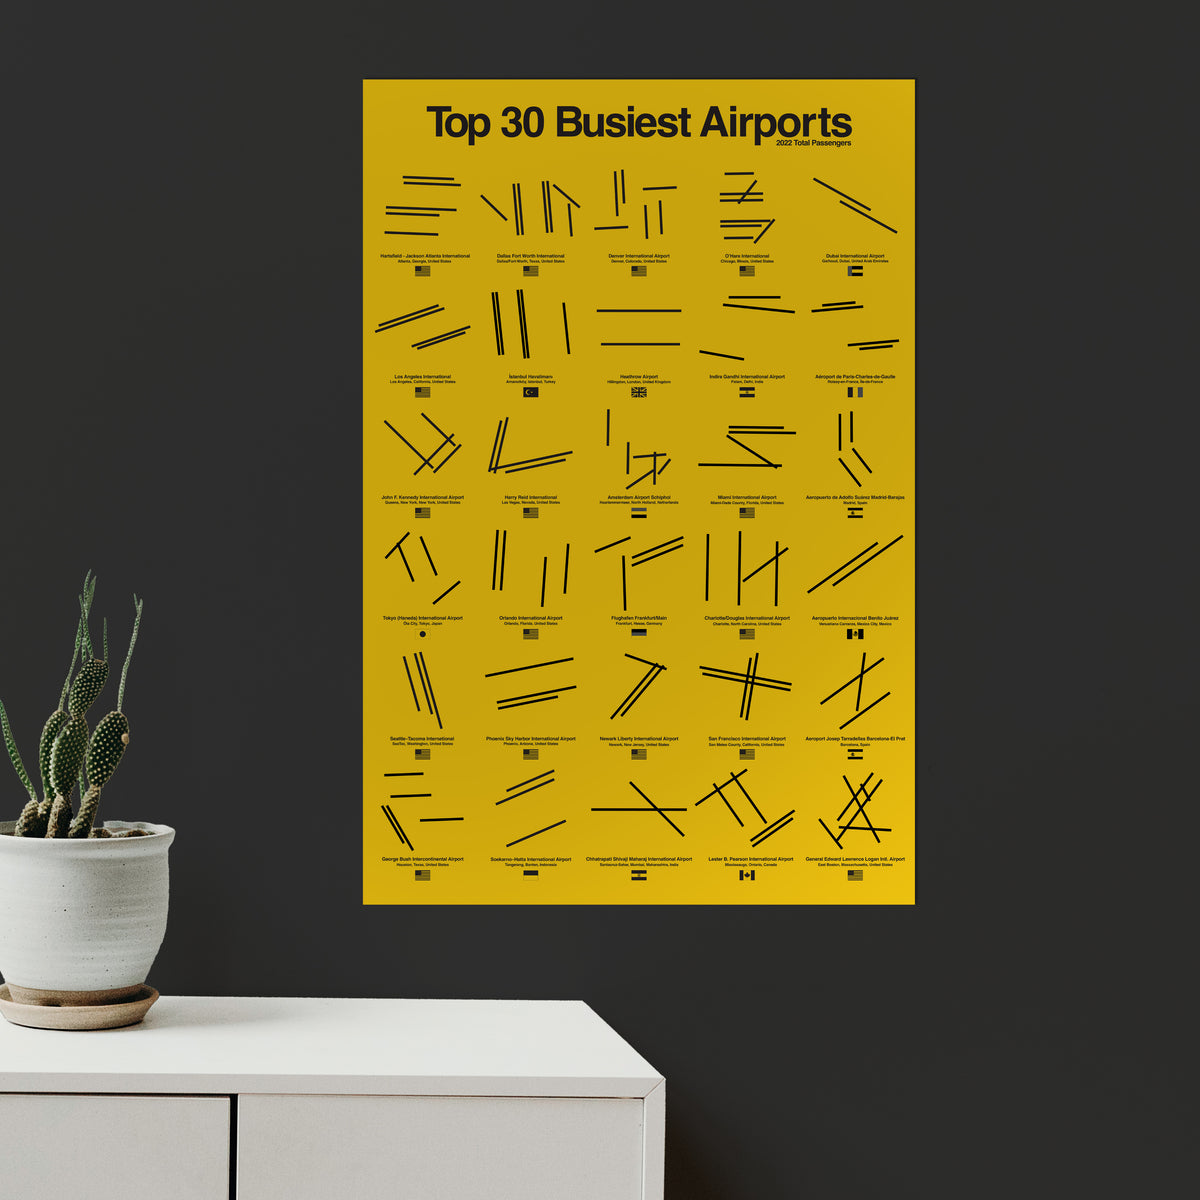 Top 30 Airport Limited Edition Poster